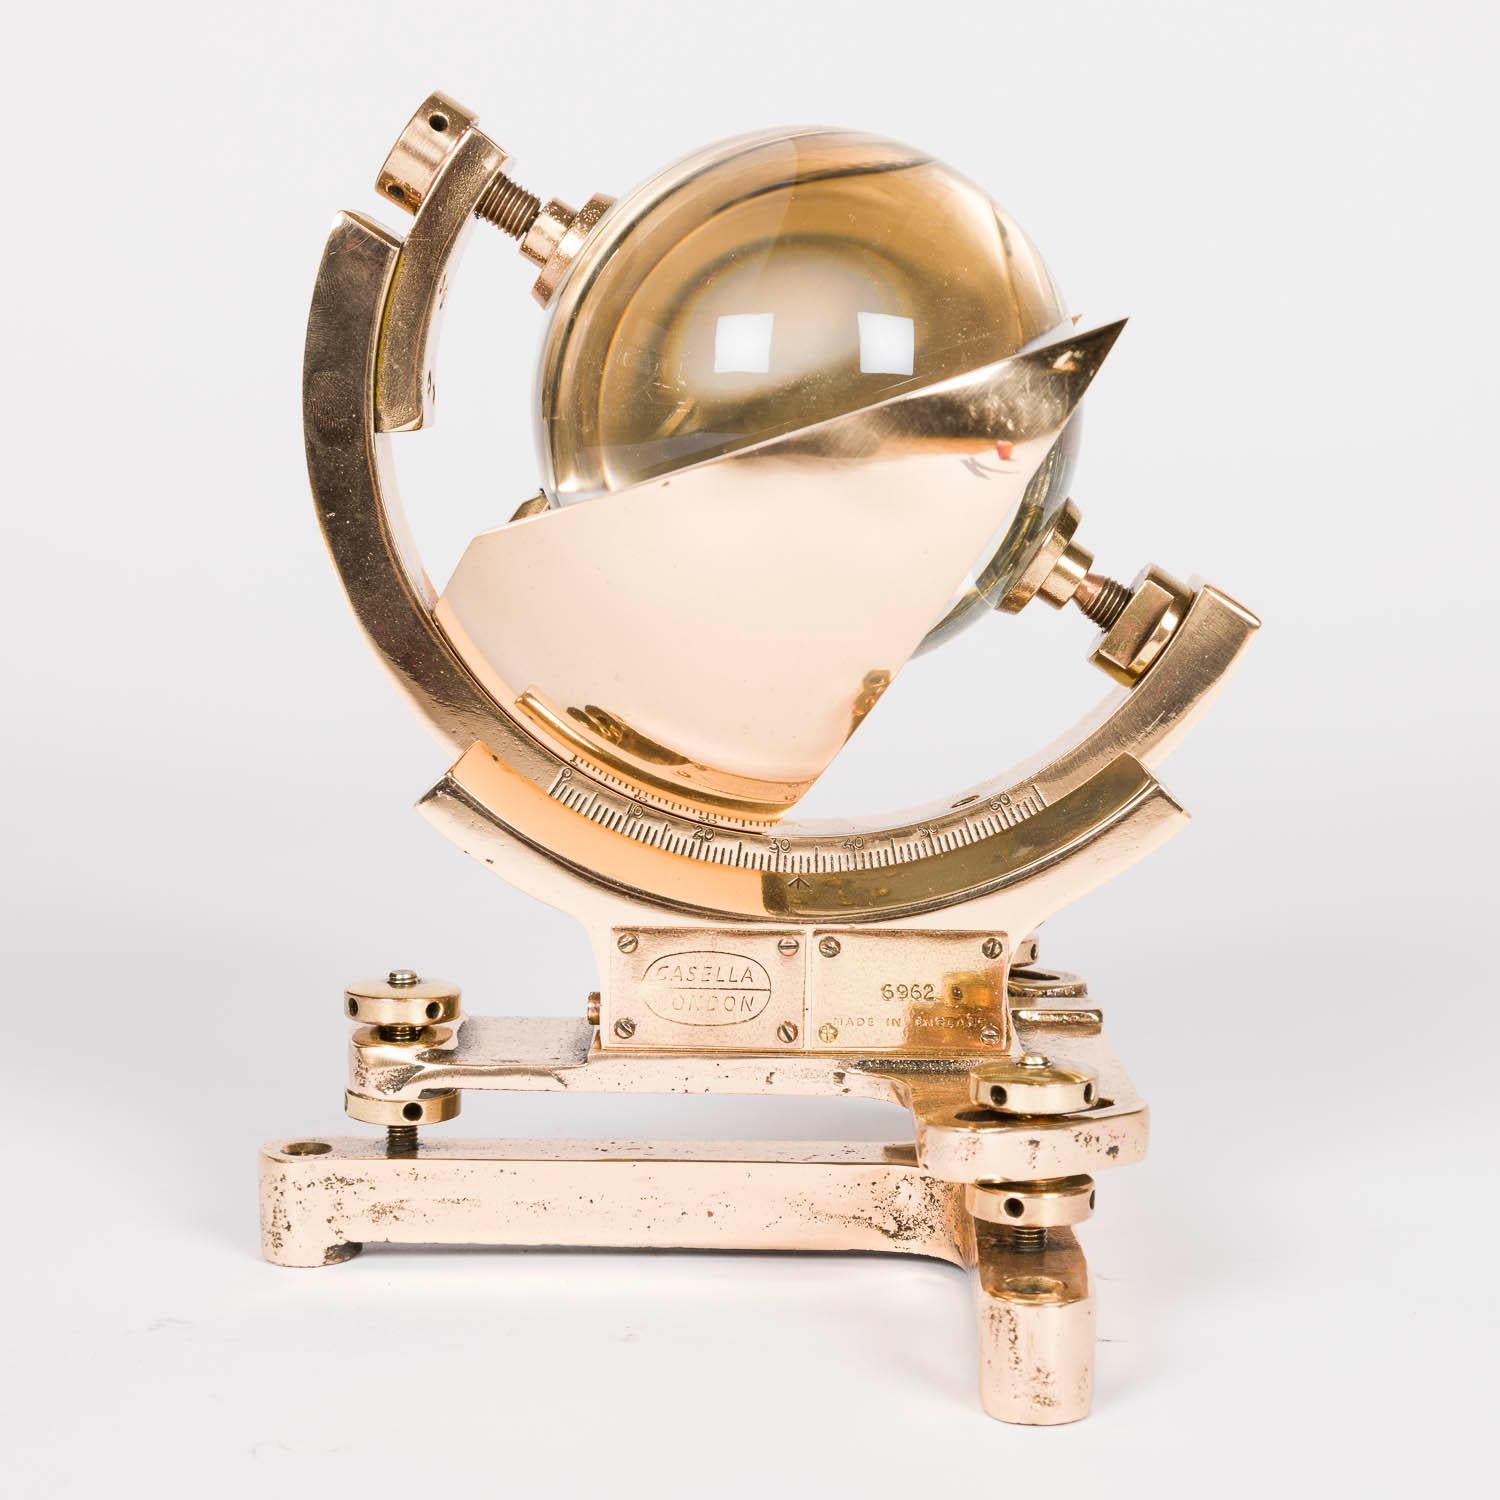 English Campbell–Stokes sunshine recorder by Casella & Co of London For Sale